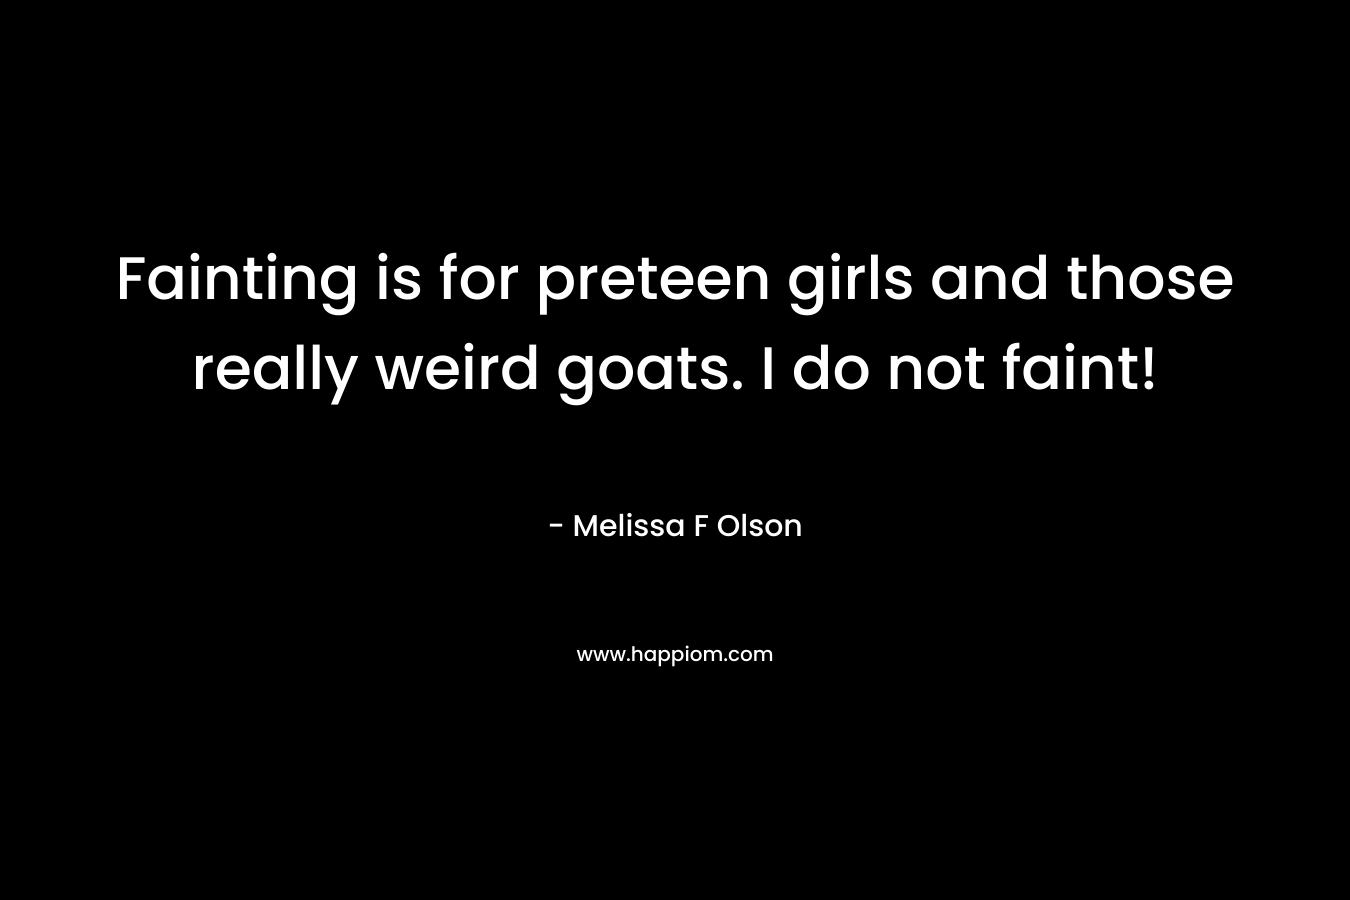 Fainting is for preteen girls and those really weird goats. I do not faint! – Melissa F Olson